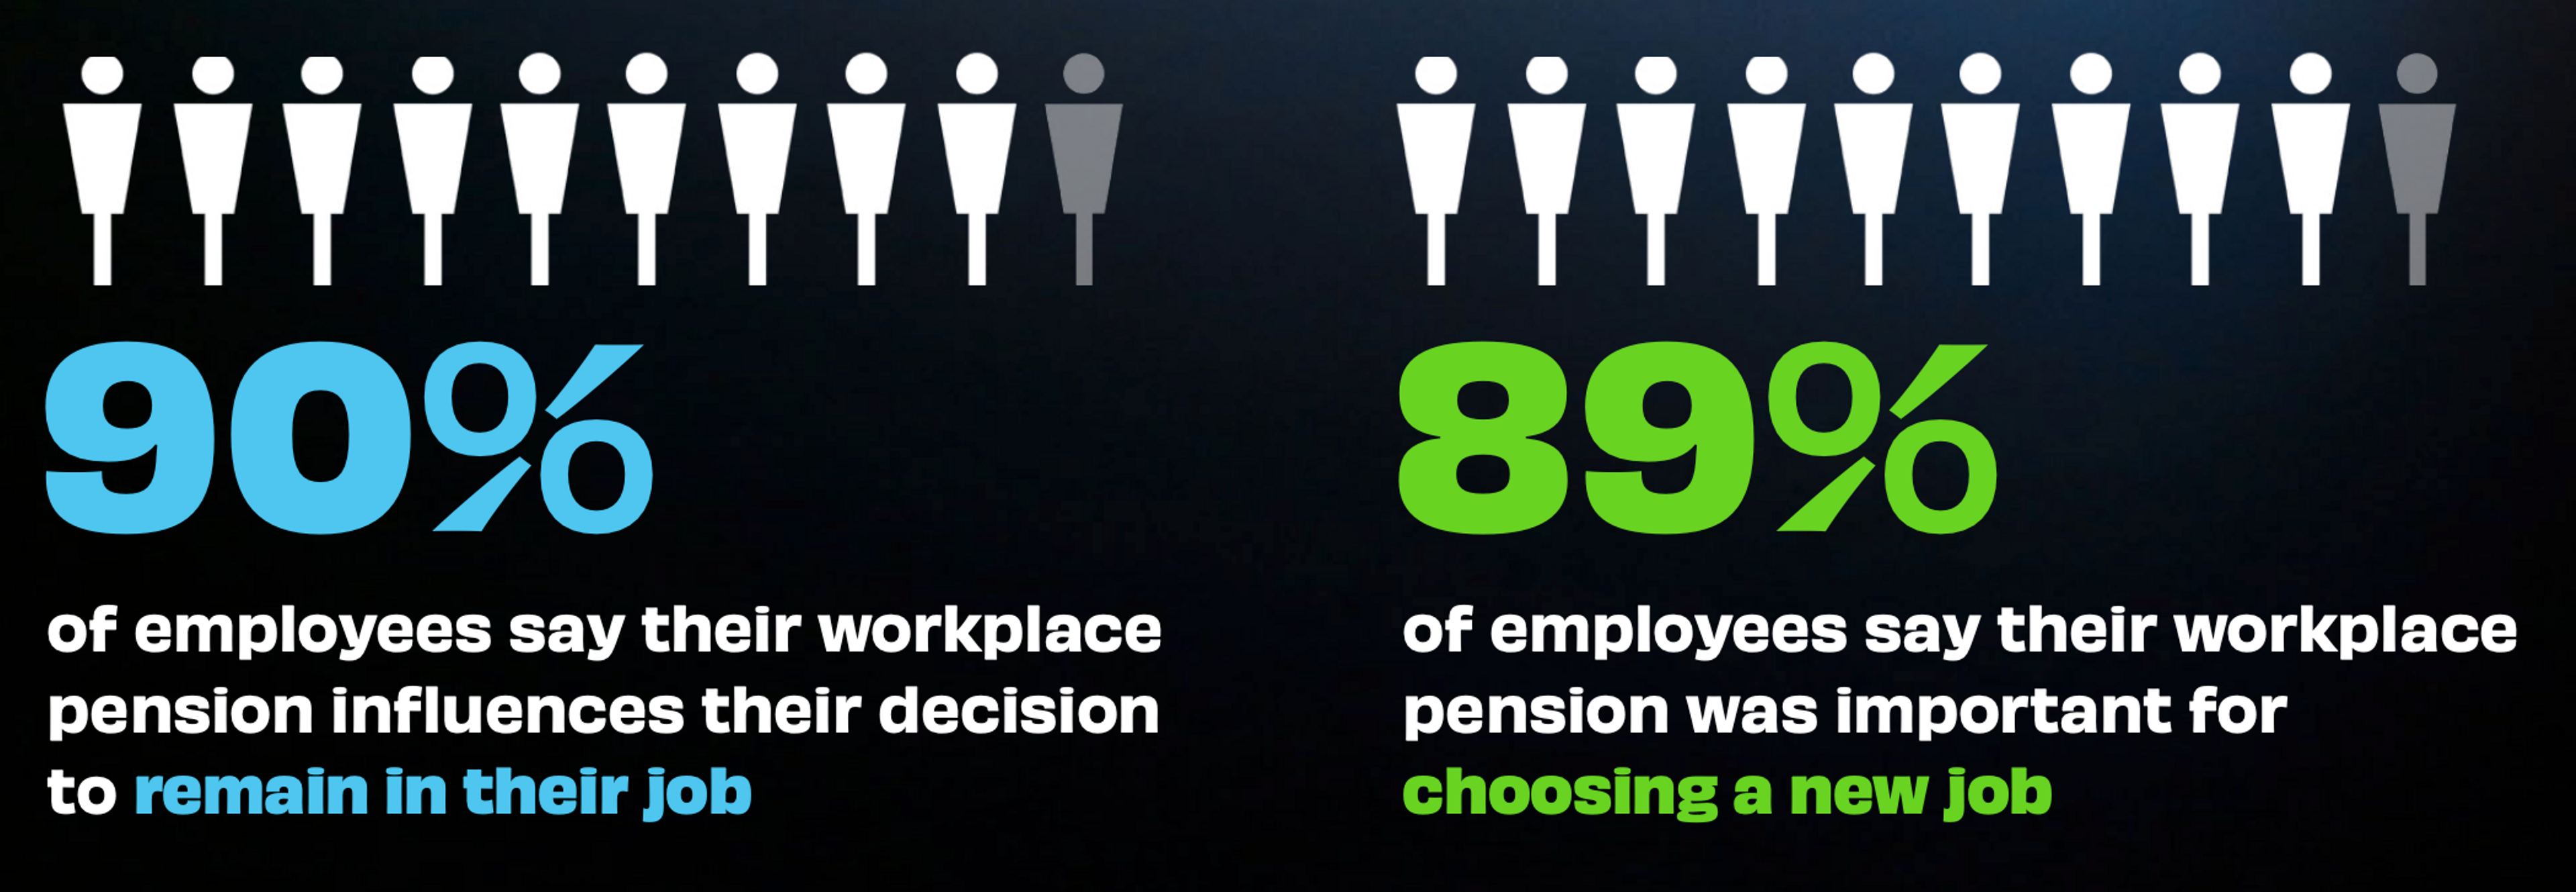 90% of employees say their workplace pension influences their decision to remain in their job